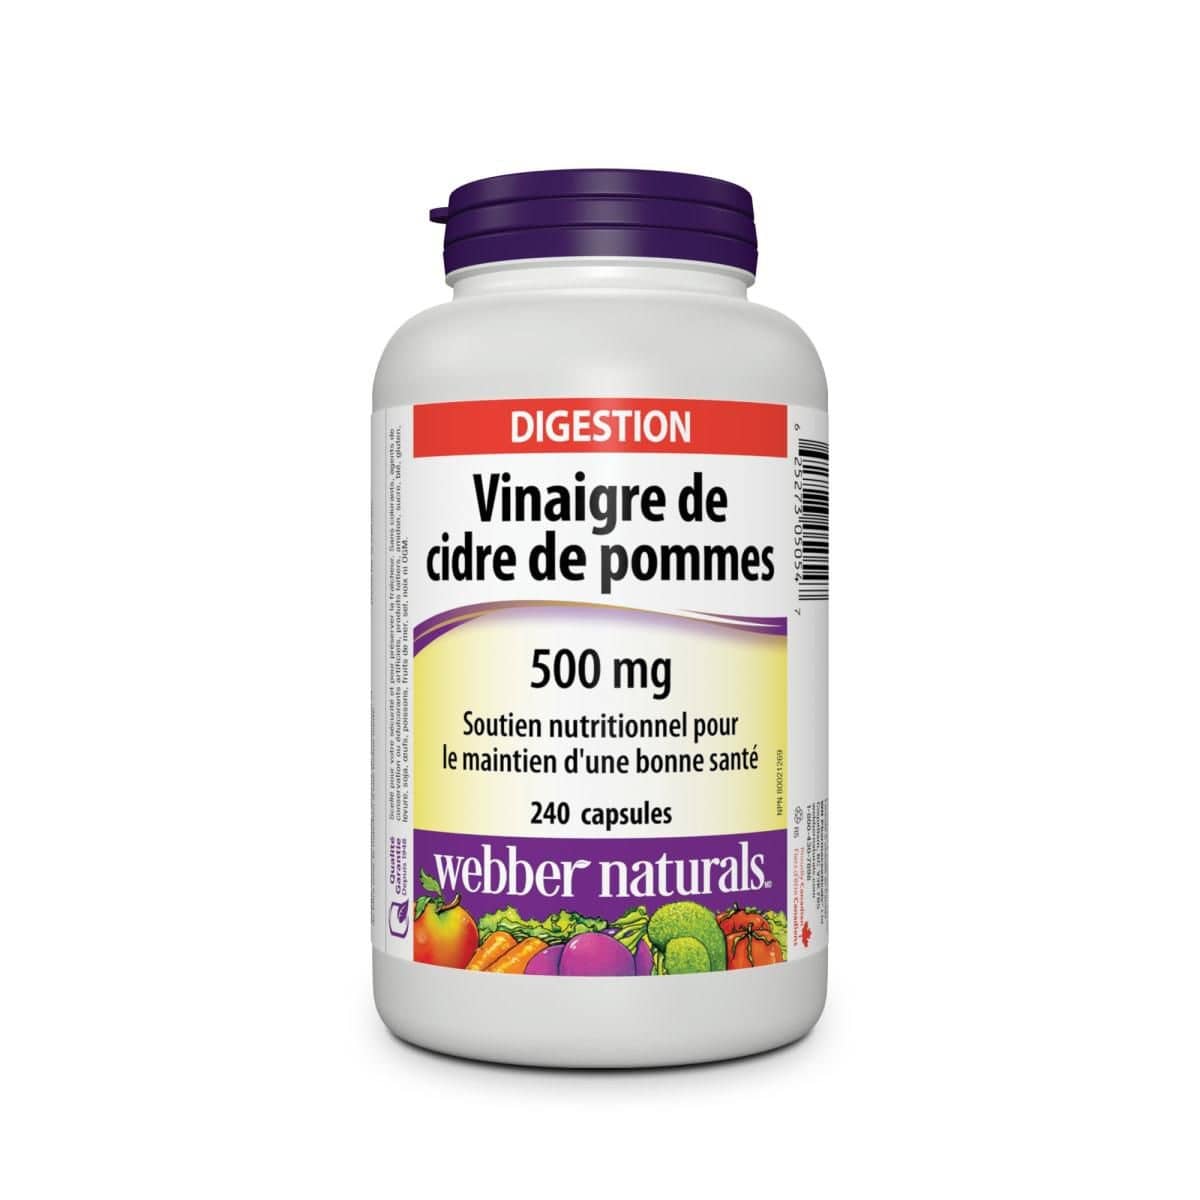 Product label for webber naturals Apple Cider Vinegar 500 mg (240 capsules) in French